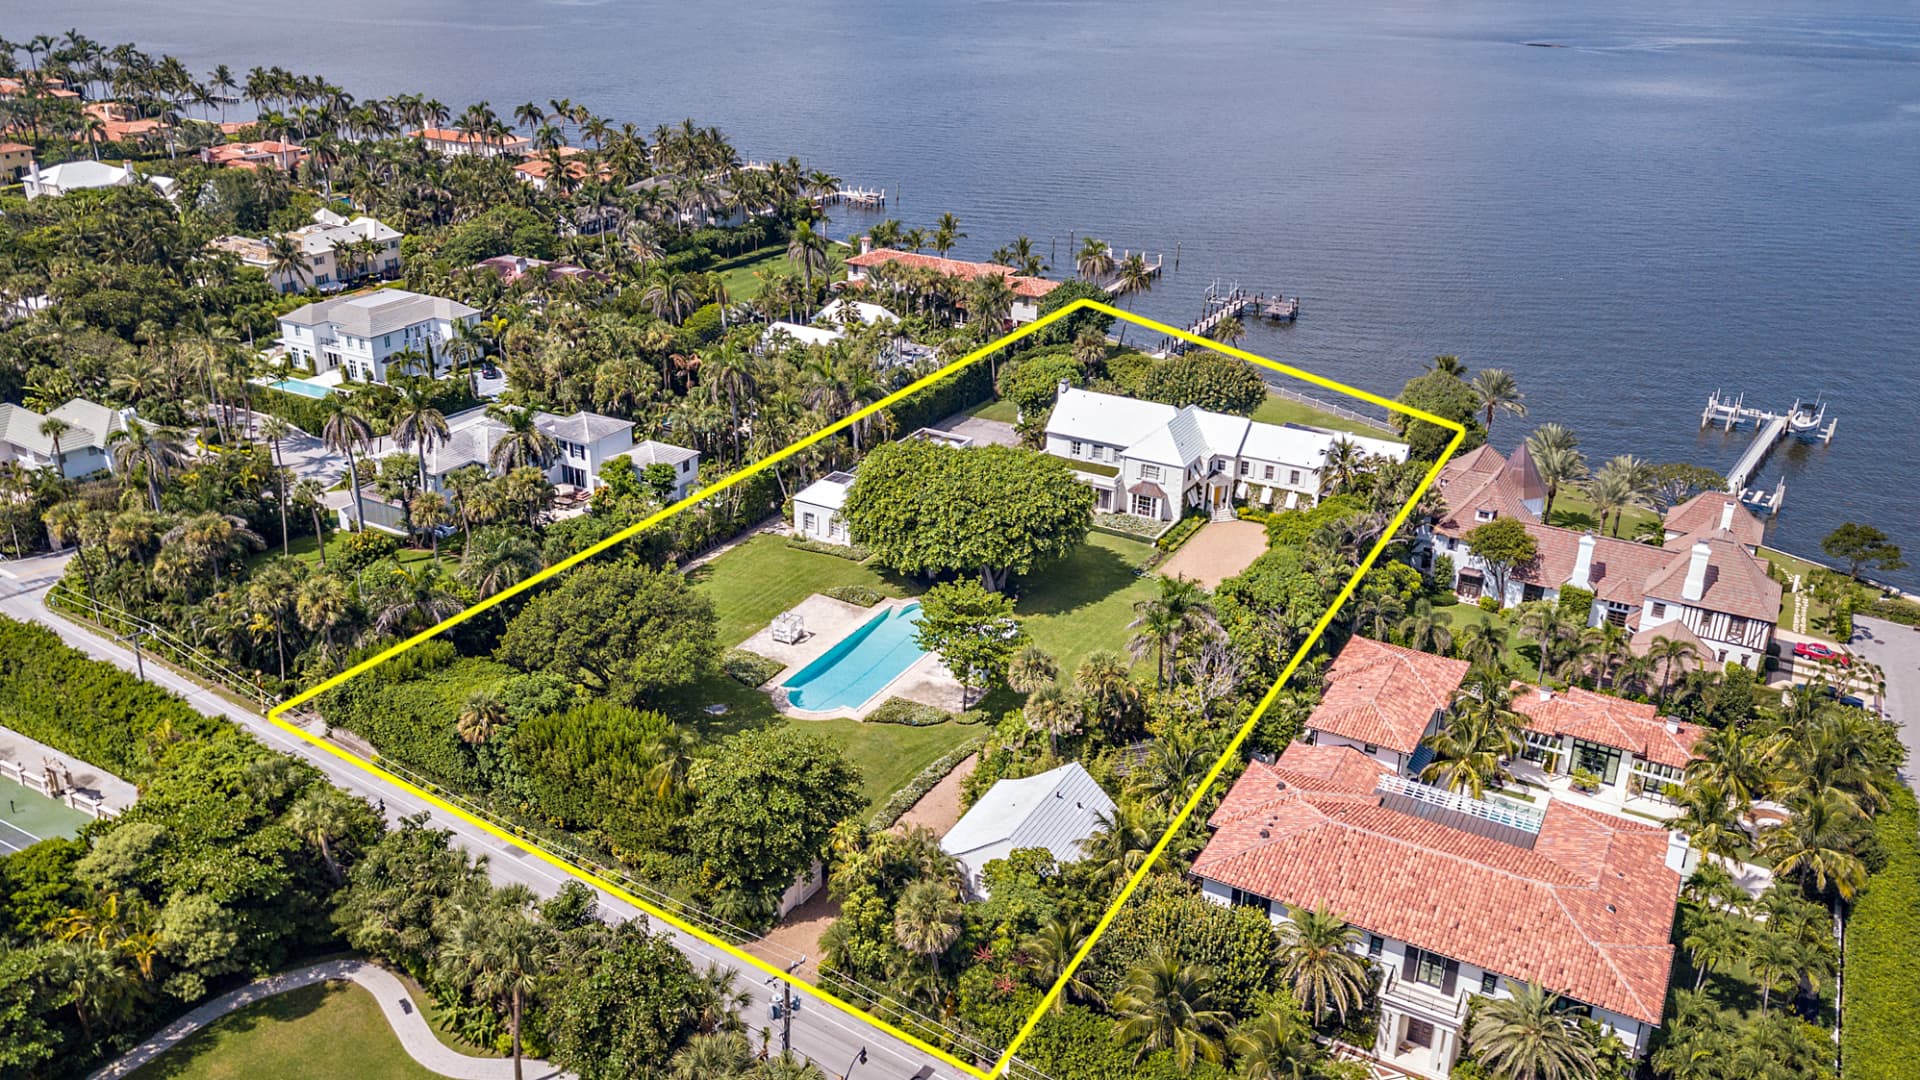 The waterfront residence at 854 S County Rd in Palm Beach, FL sold for $53 million.